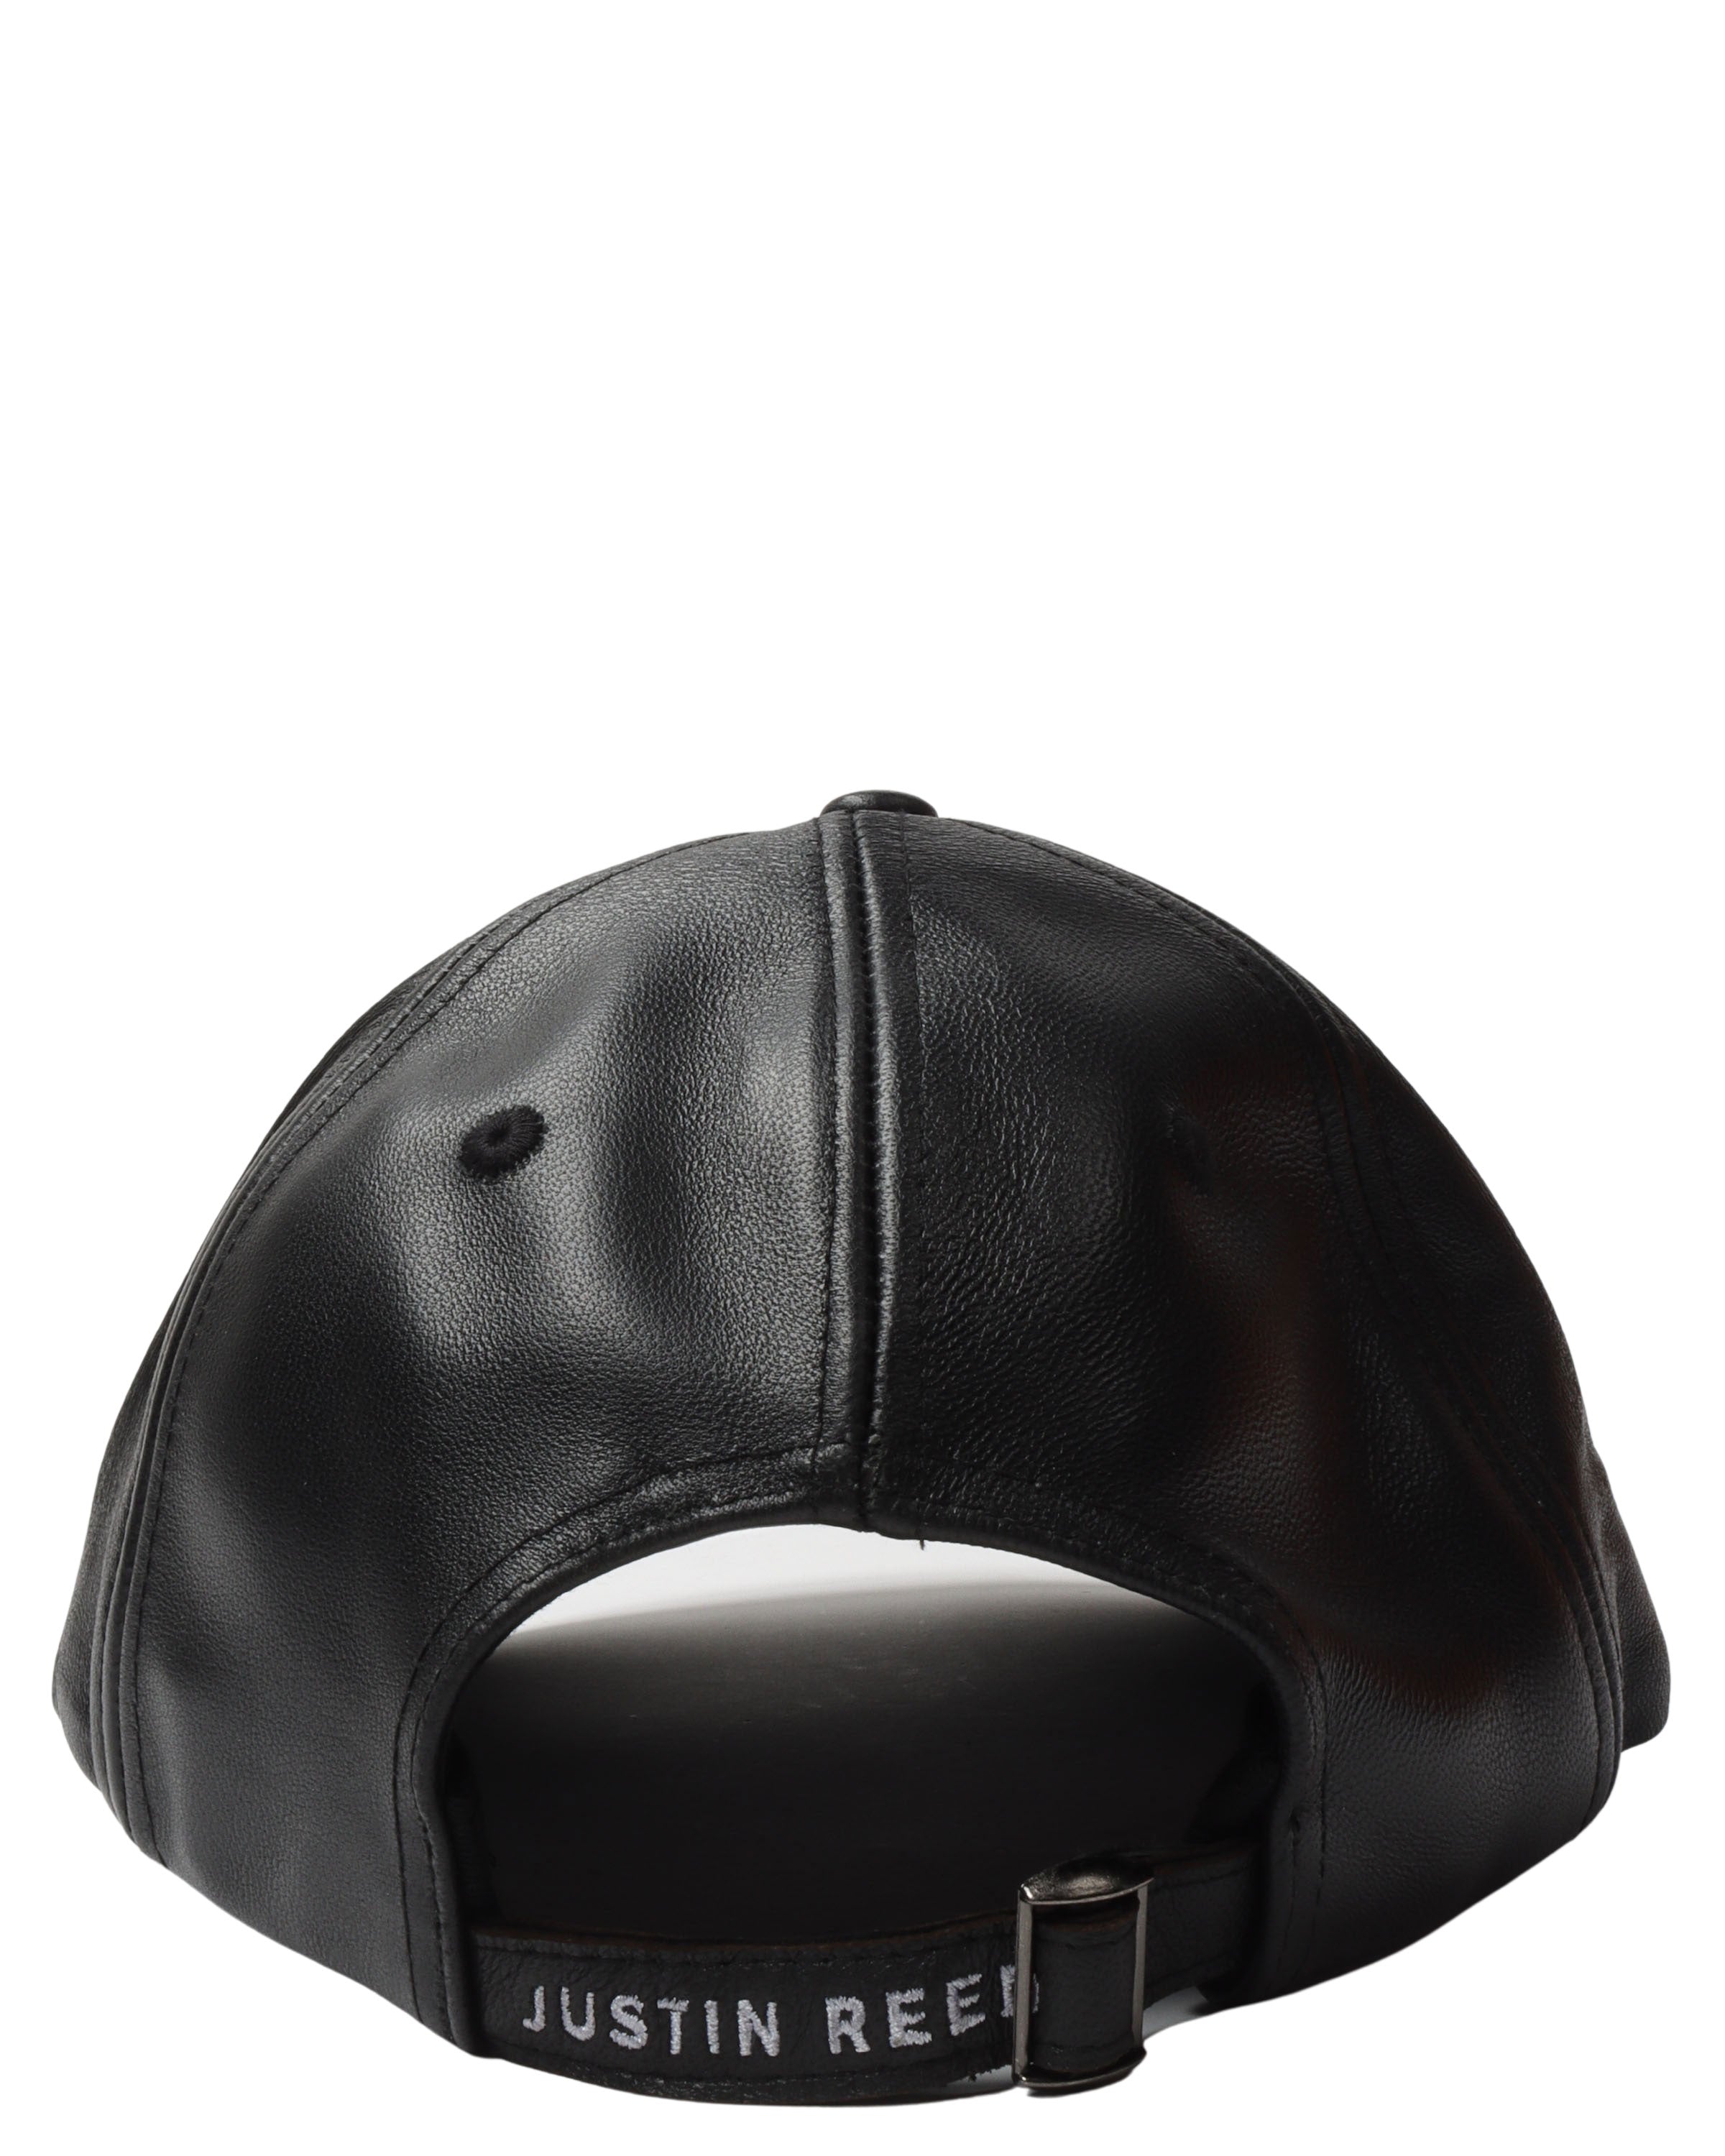 "Historical Significance" Leather Hat